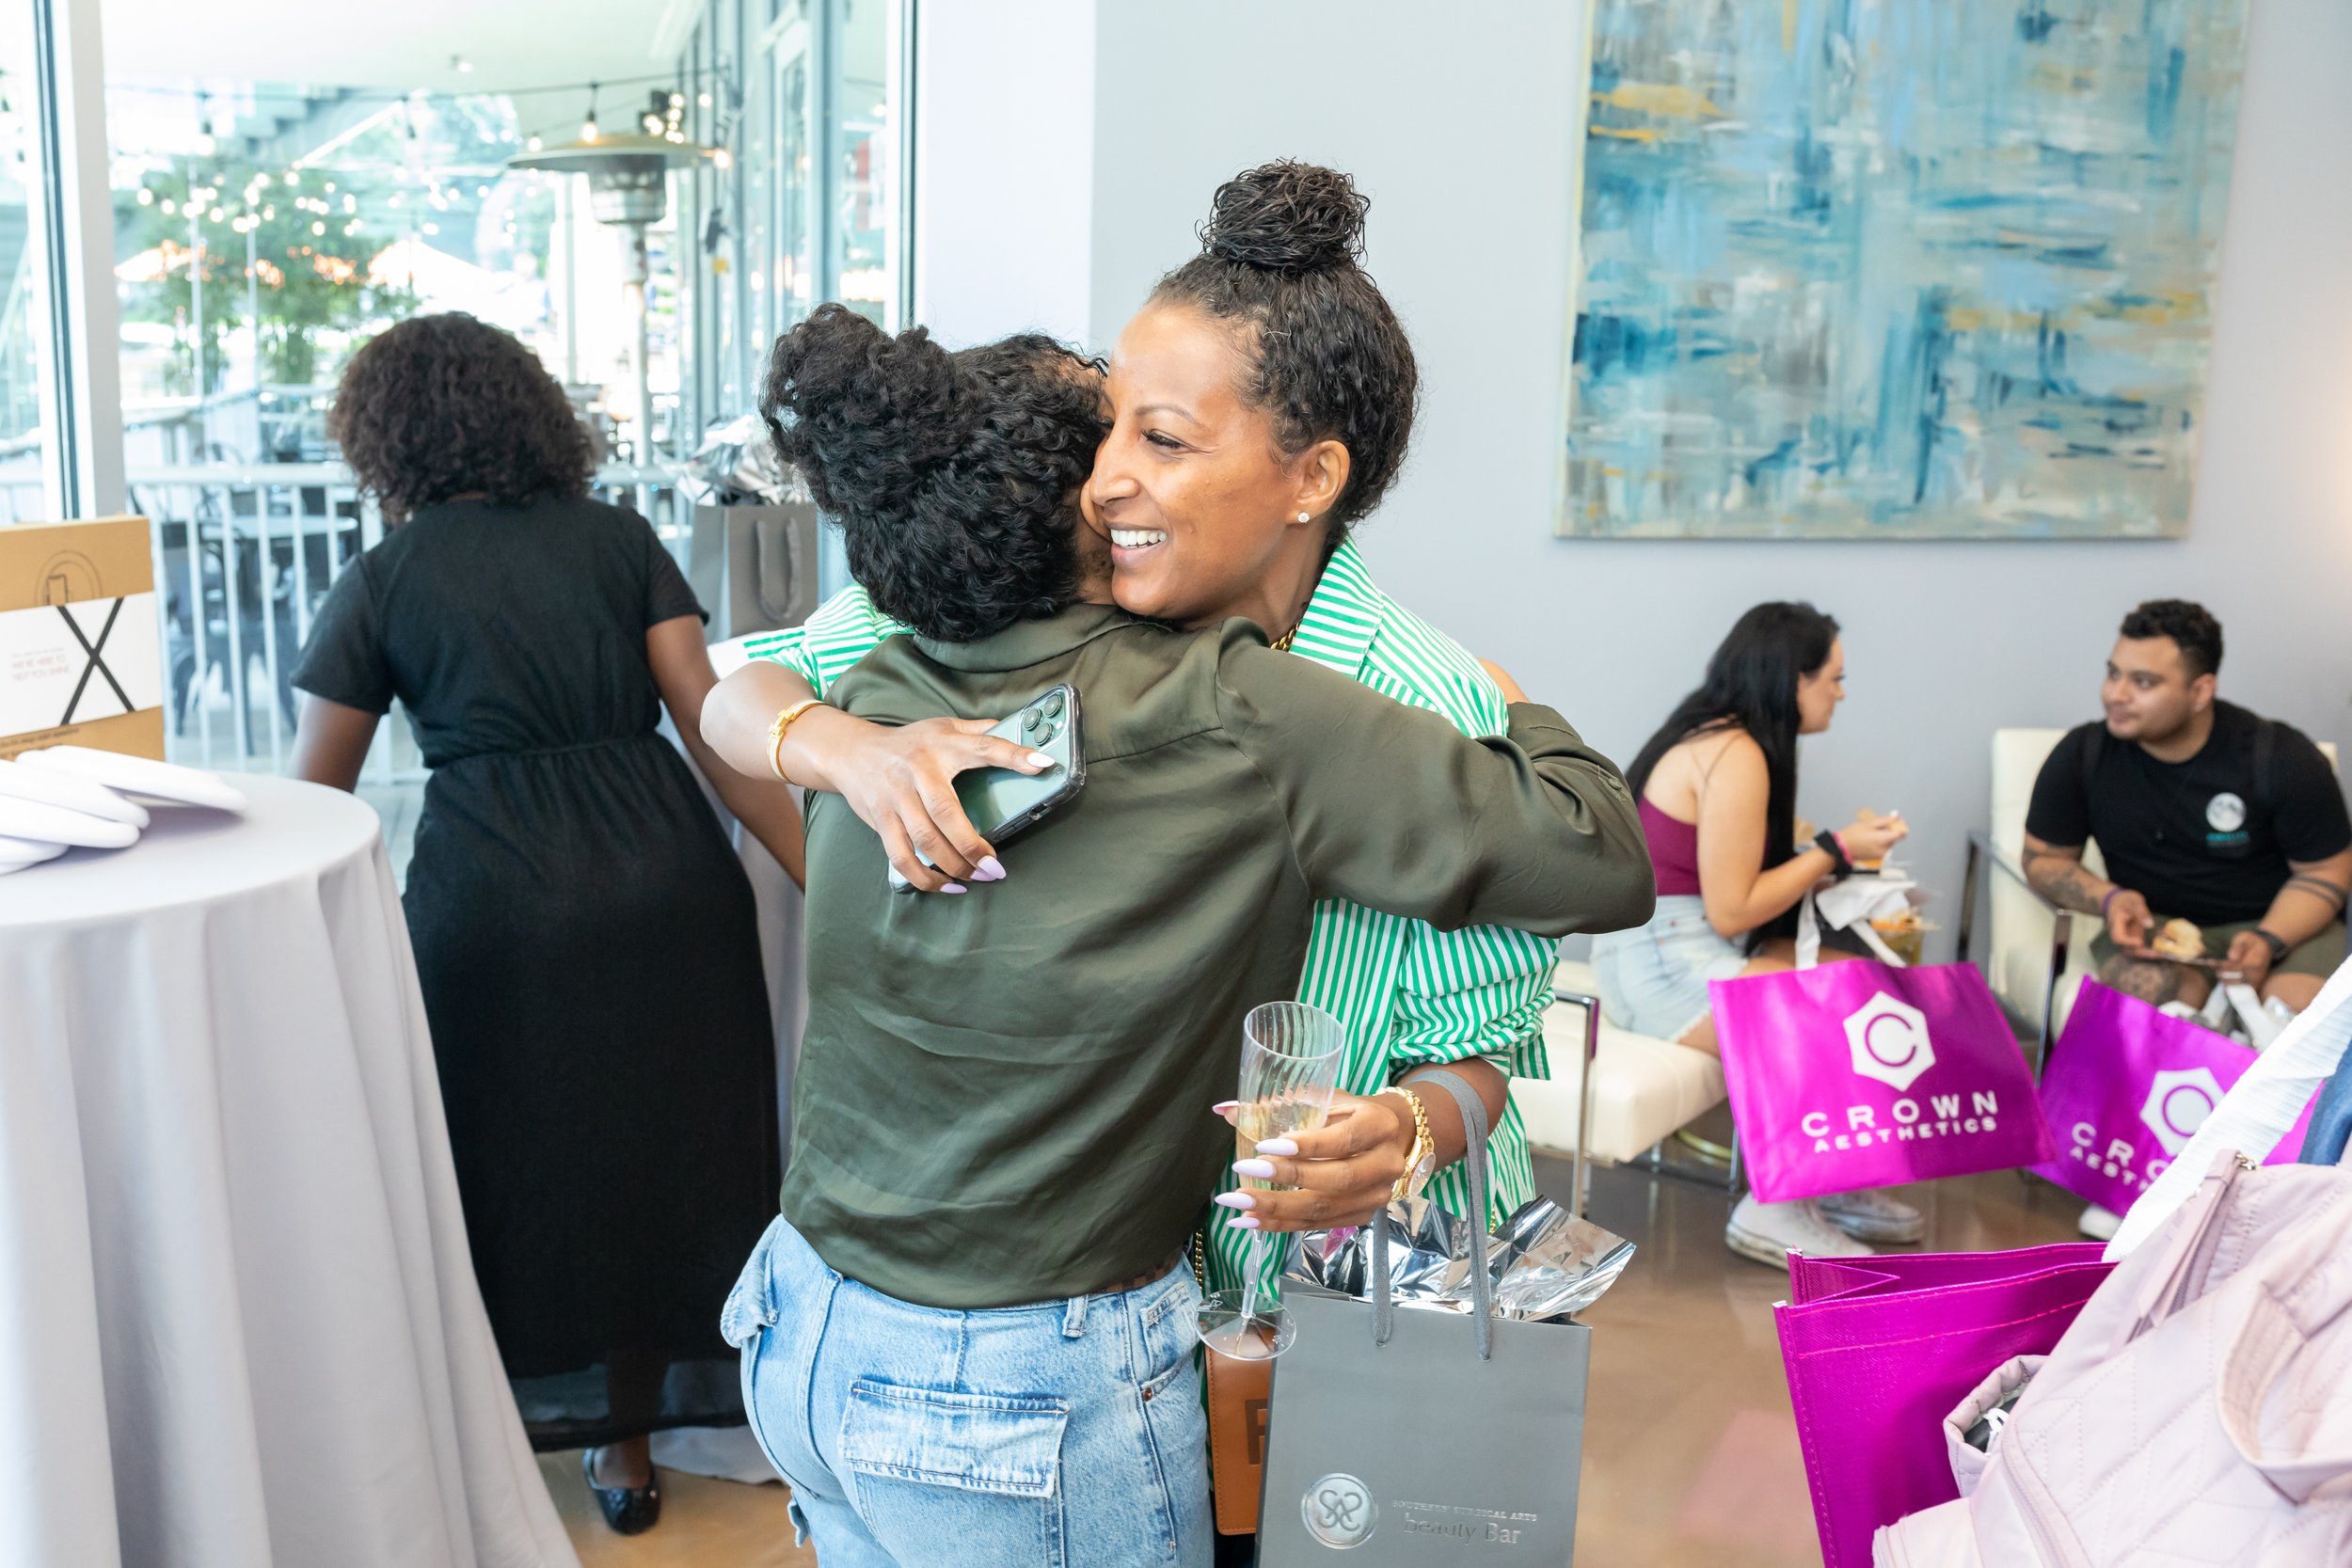 20230817-The Luxe List Atlanta-Southern Surgical Arts Beauty Bar Grand Opening-THU-BC-033.jpg (Copy)